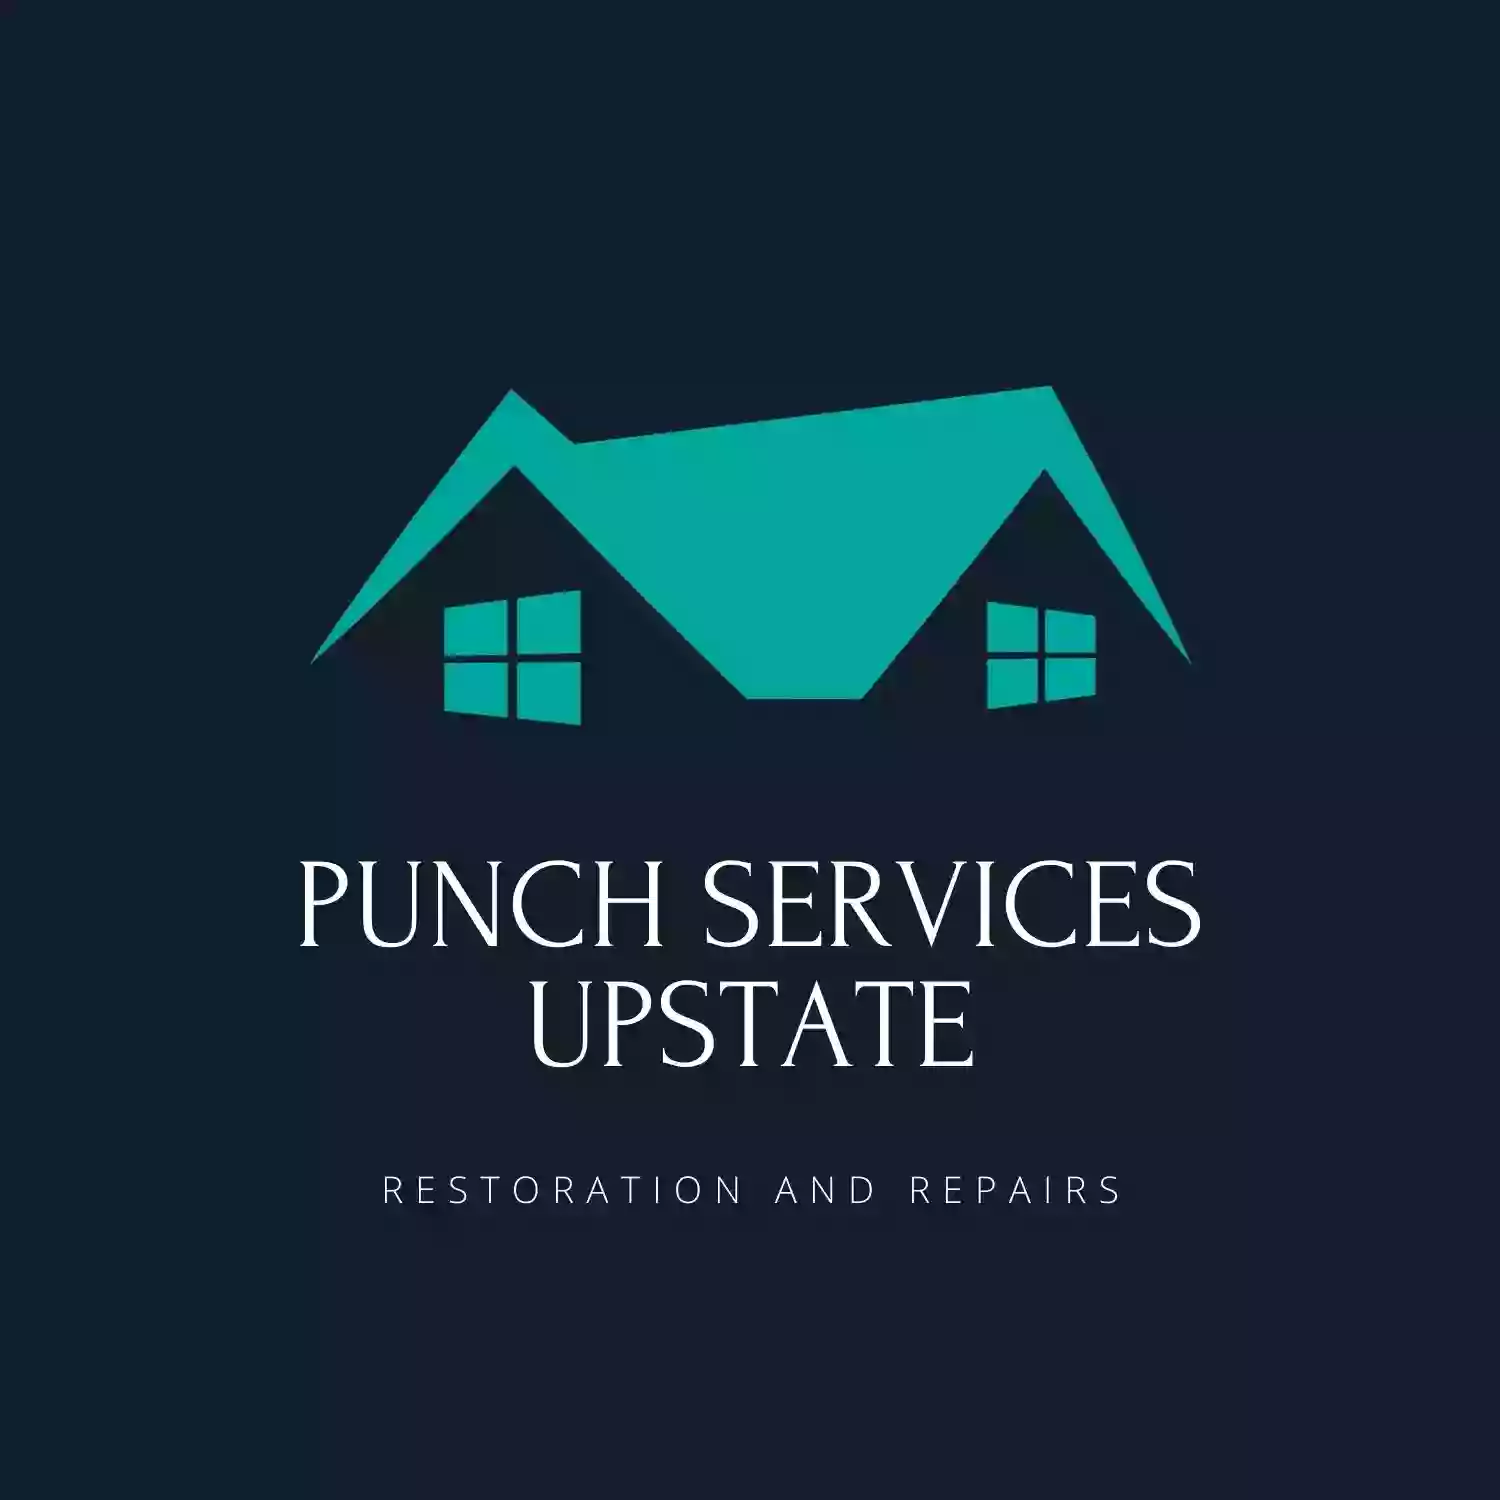 Punch Services Upstate